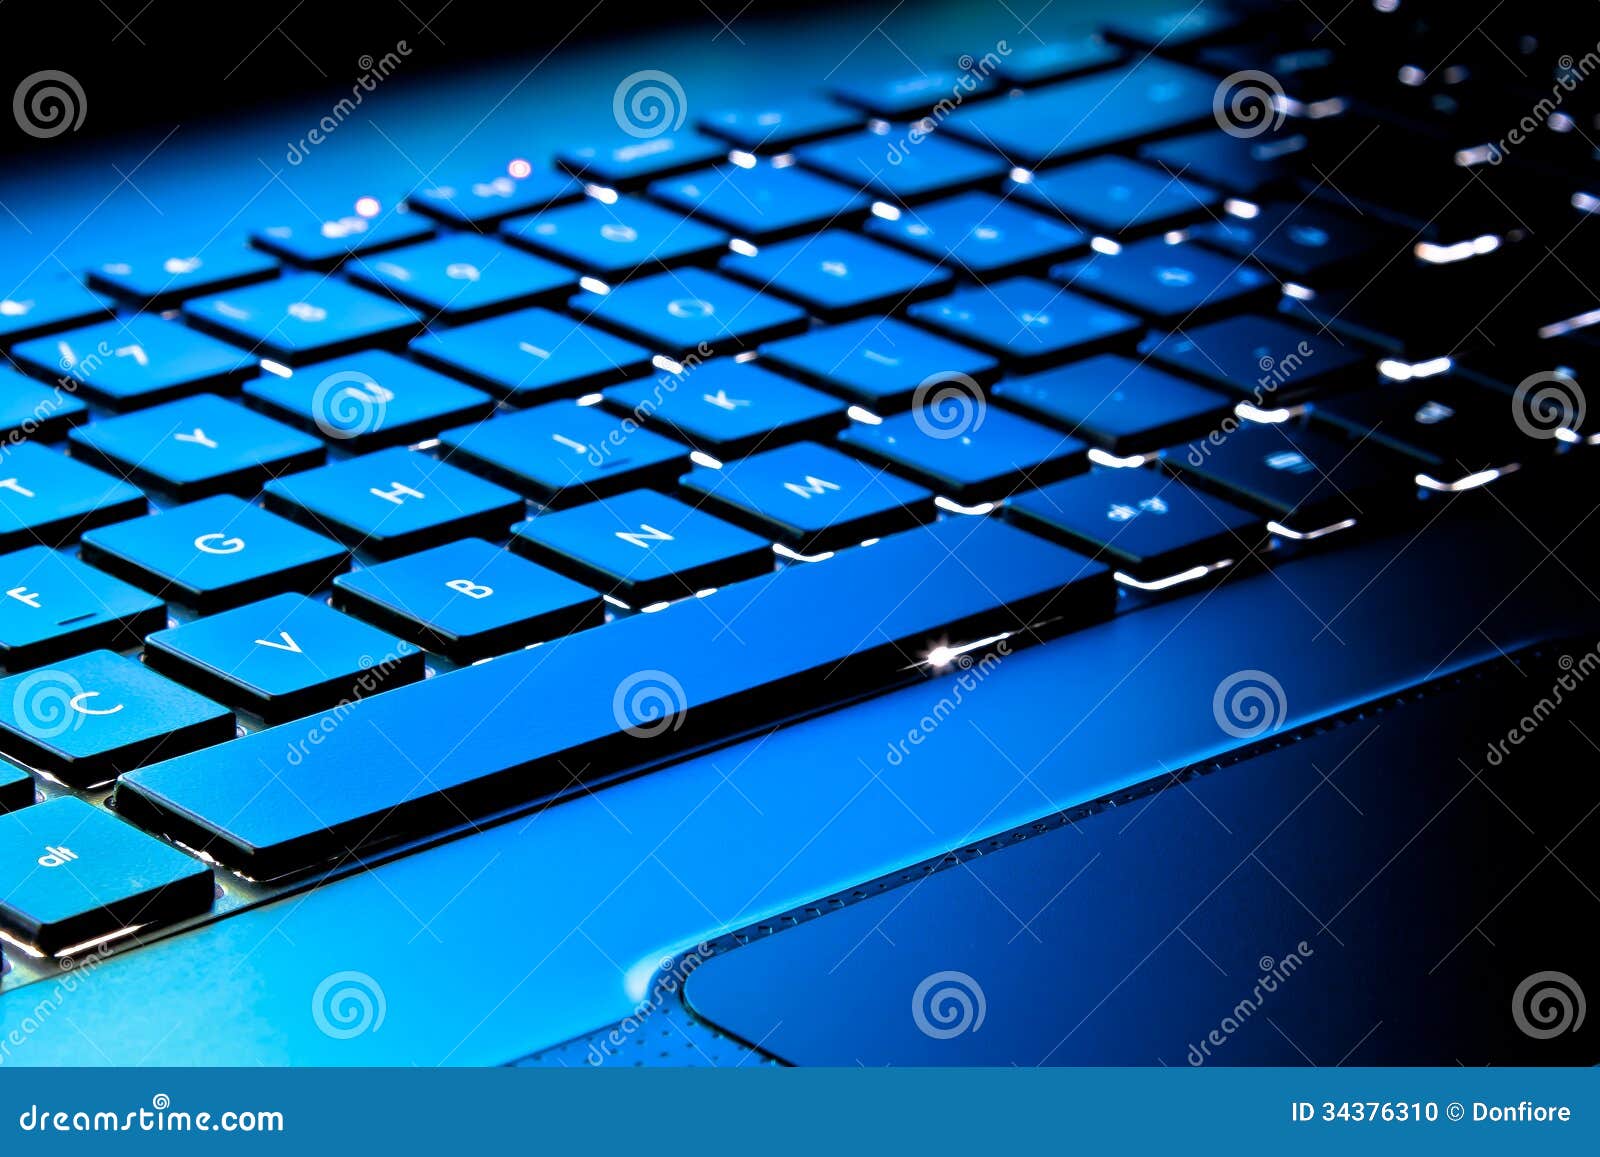 Laptop Keyboard As A Background Toned To Blue Stock Photo Image